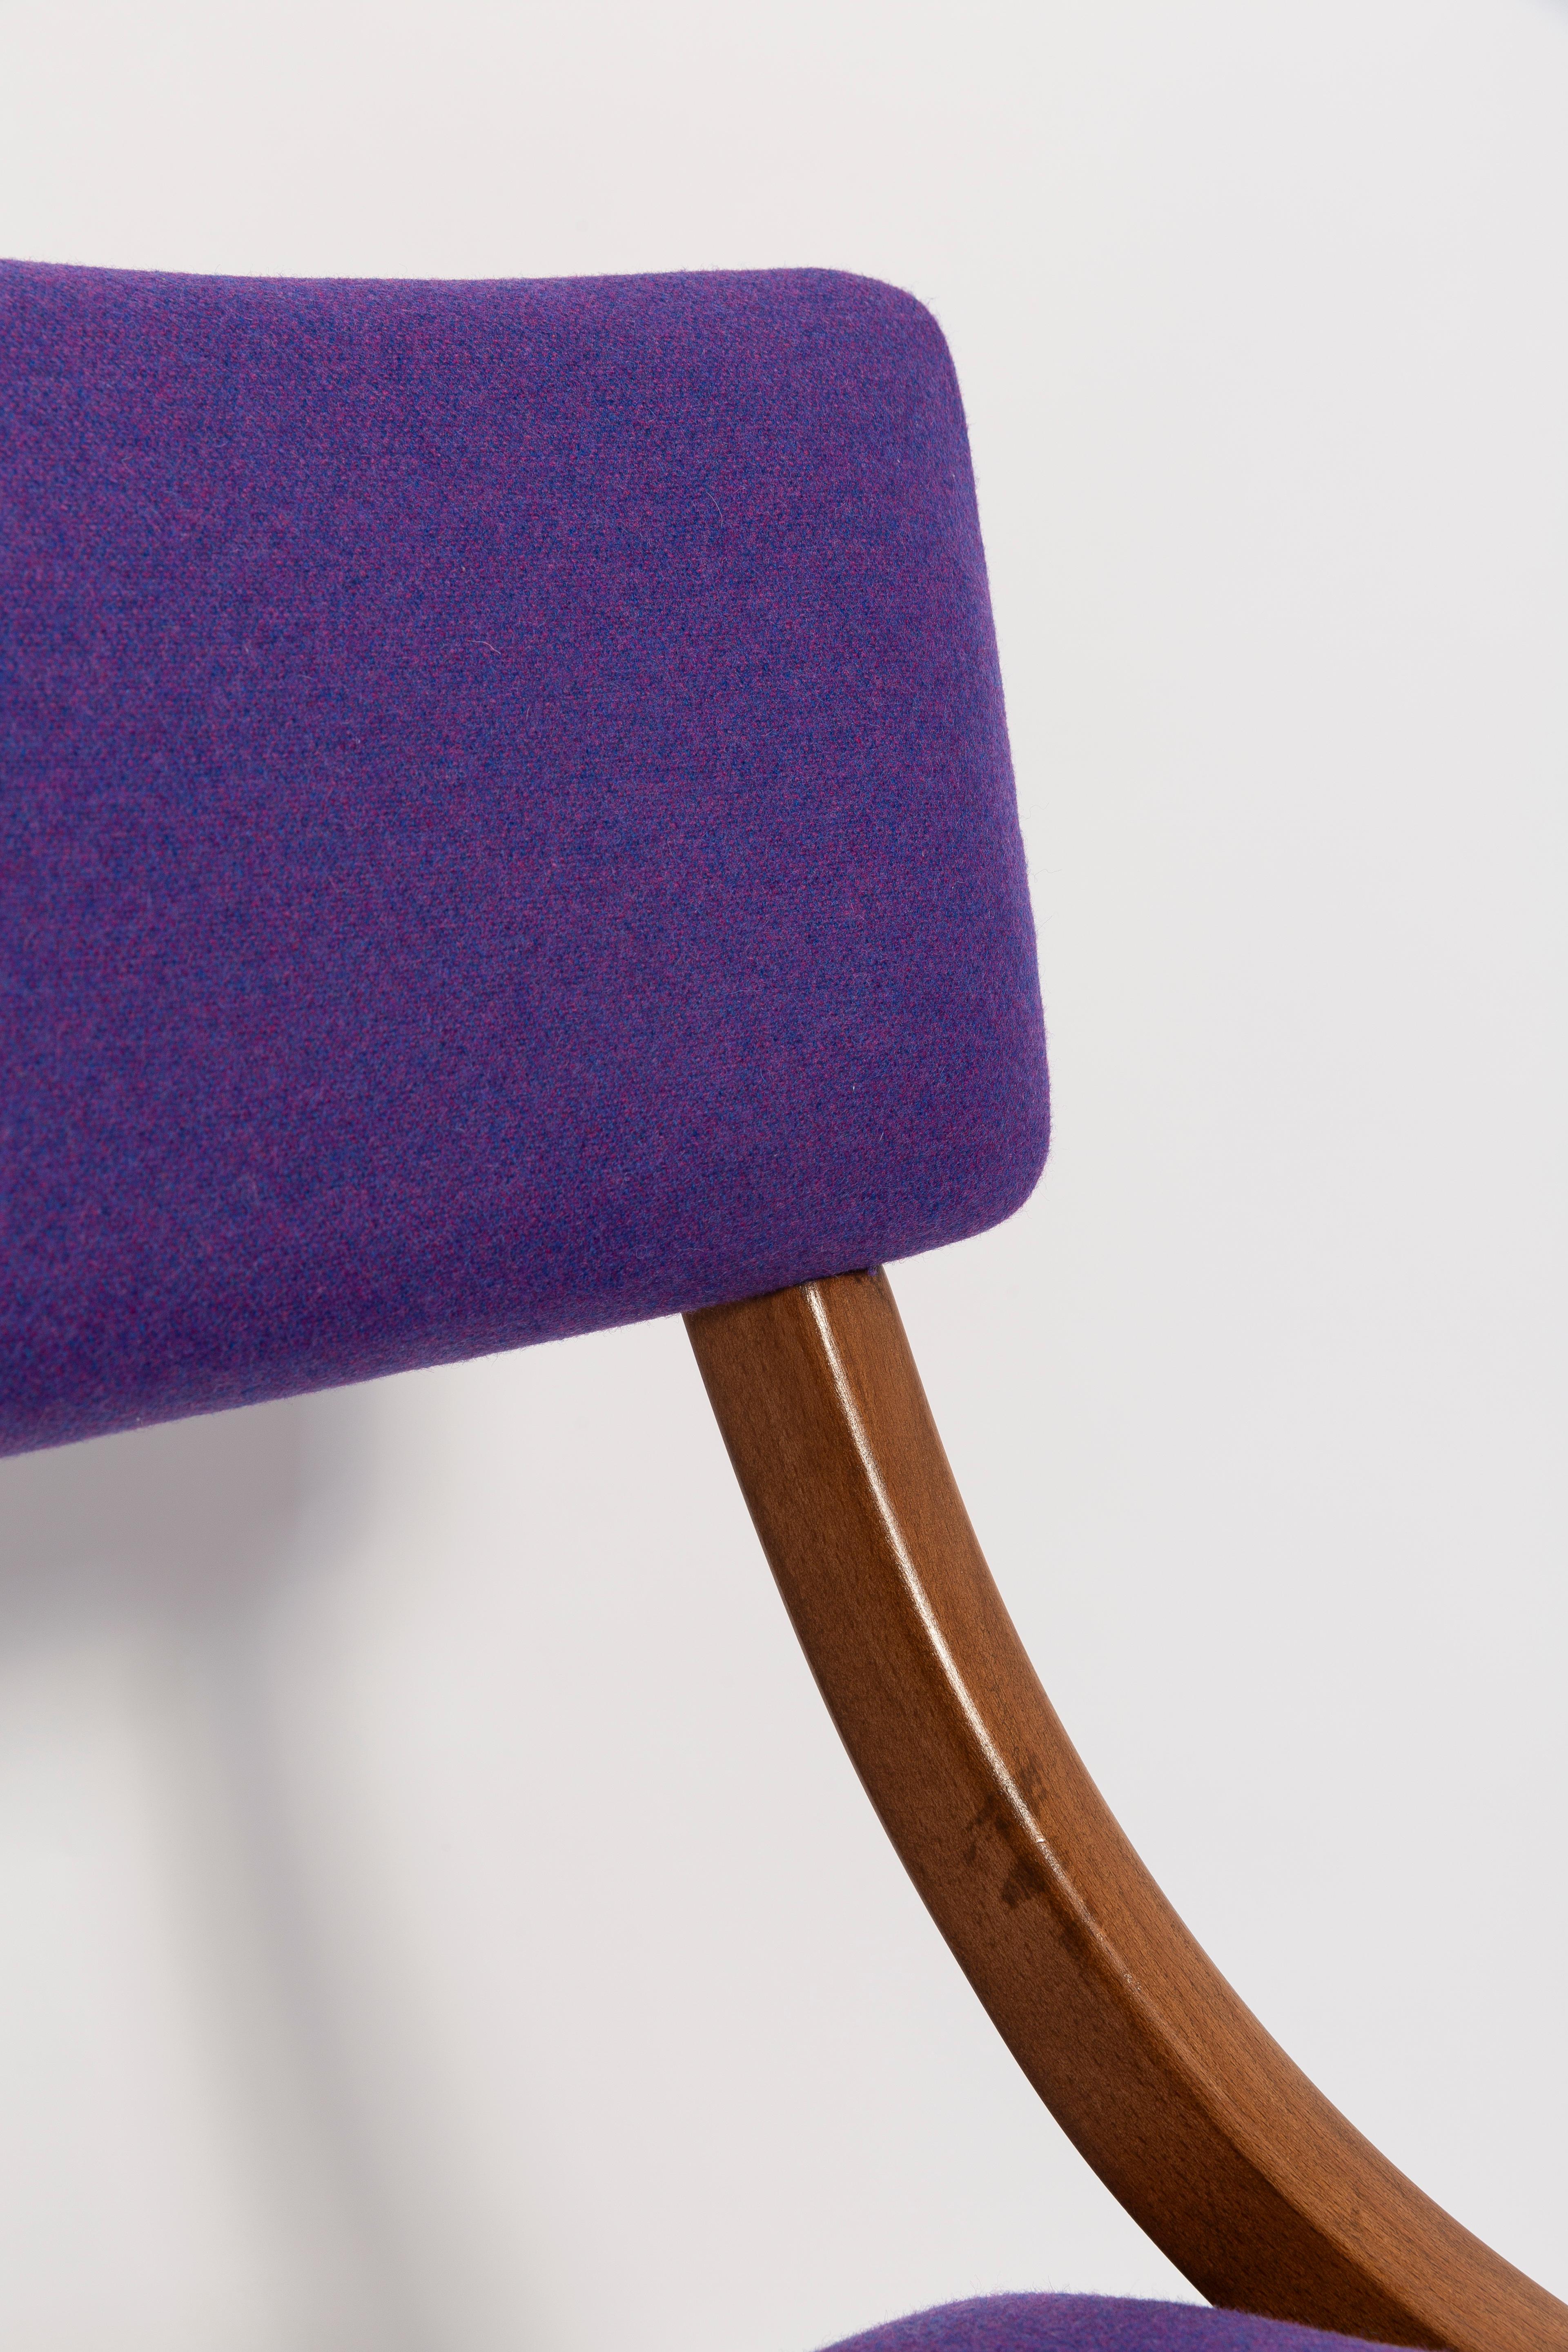 Hand-Crafted Mid Century Modern Bumerang Chair, Purple Violet Wool, Poland, 1960s For Sale